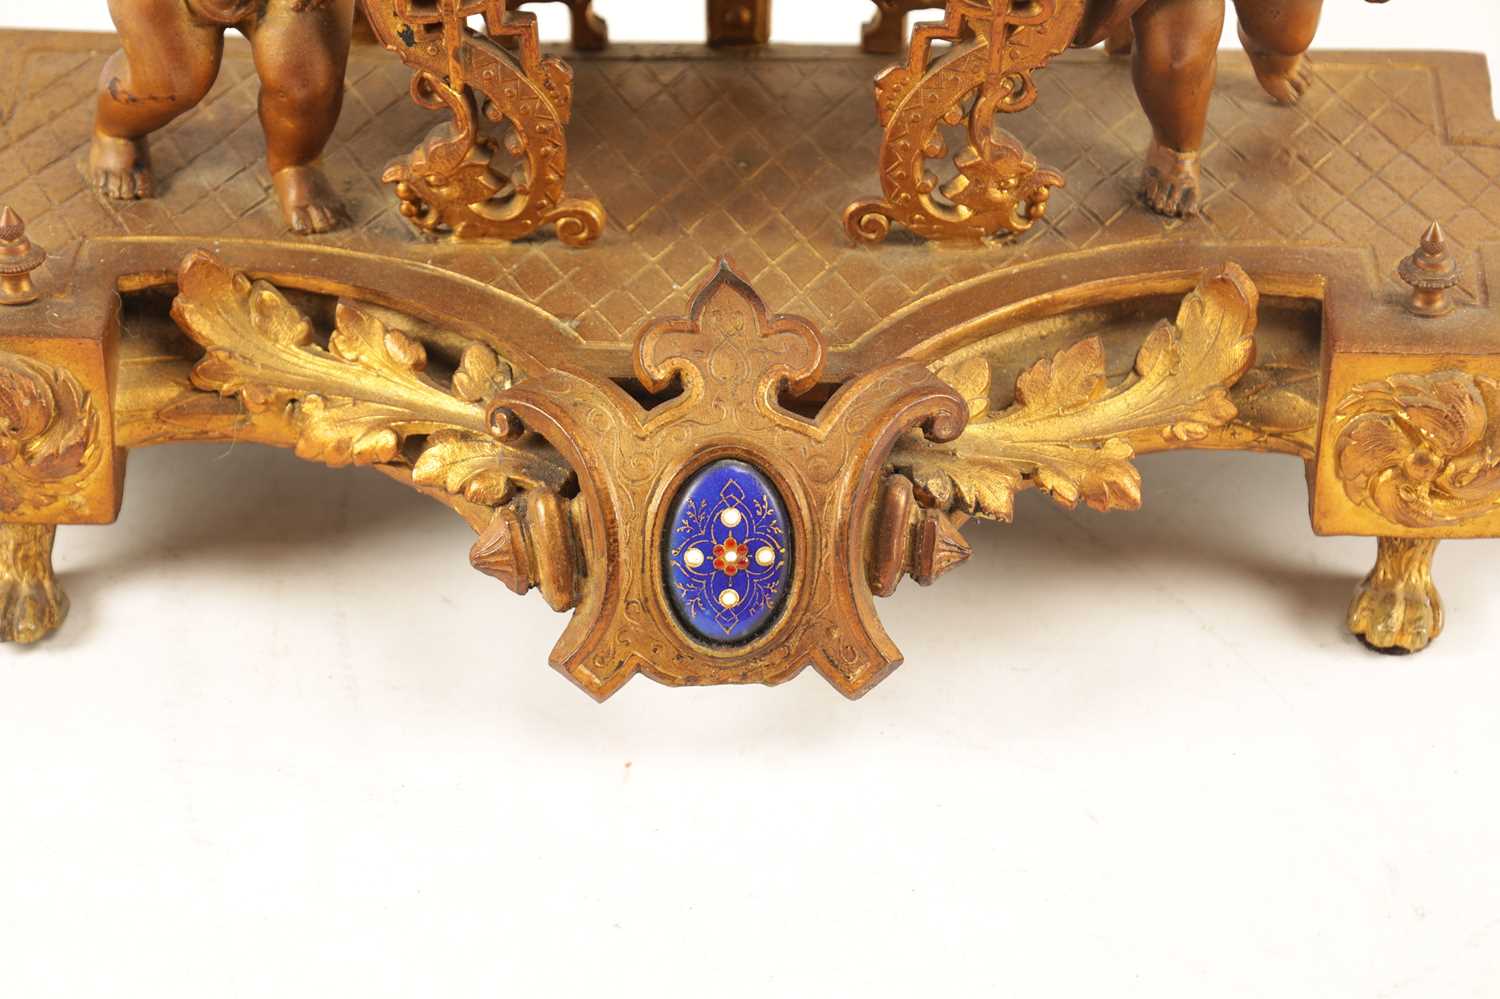 A LATE 19TH CENTURY FRENCH GILT METAL FIGURAL MANTEL CLOCK - Image 6 of 15